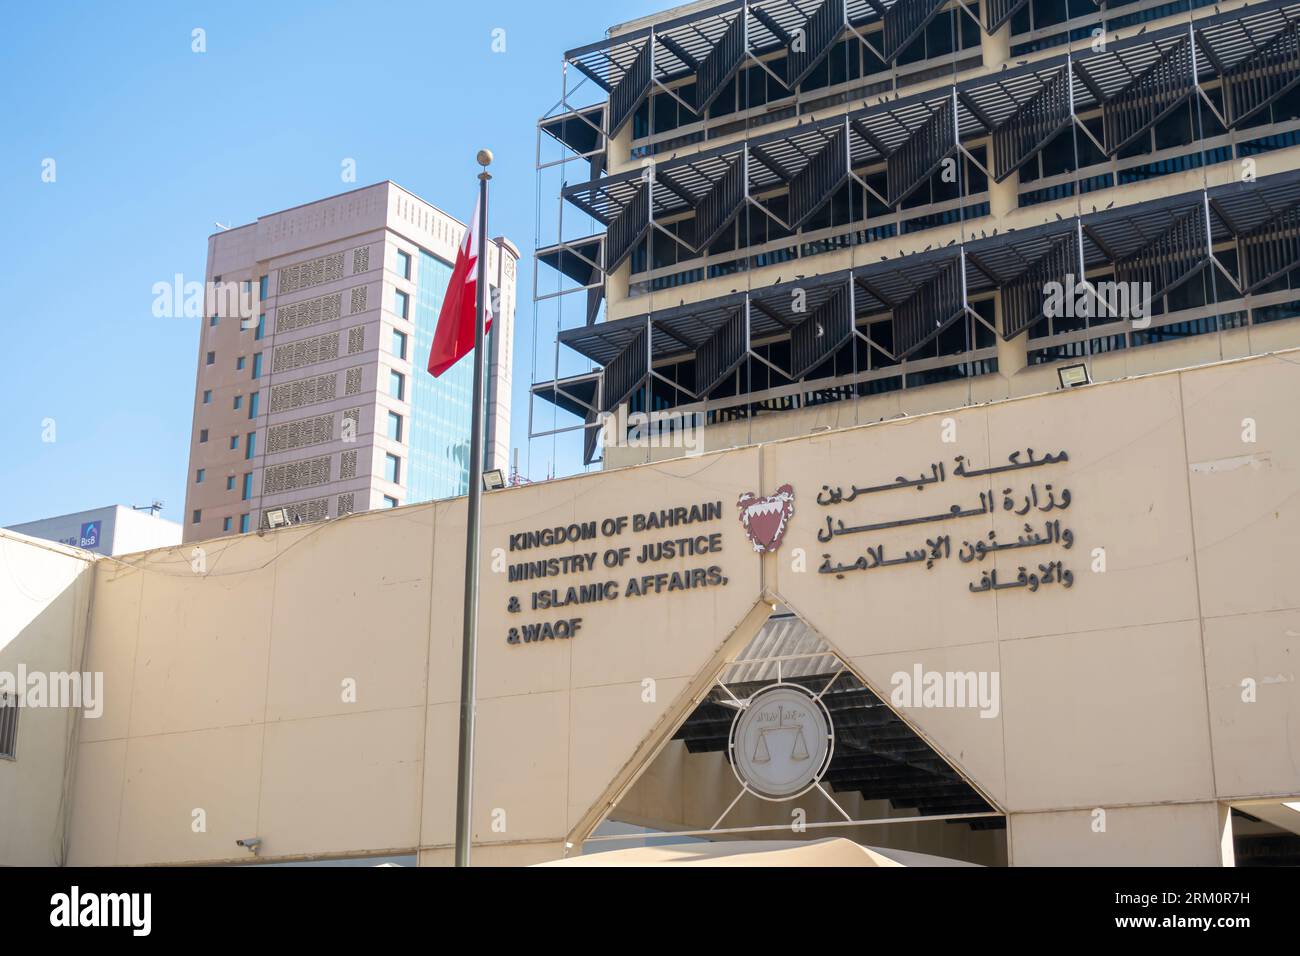 Ministry of Justice and Islamic Affairs building and sign Bahrain Stock Photo